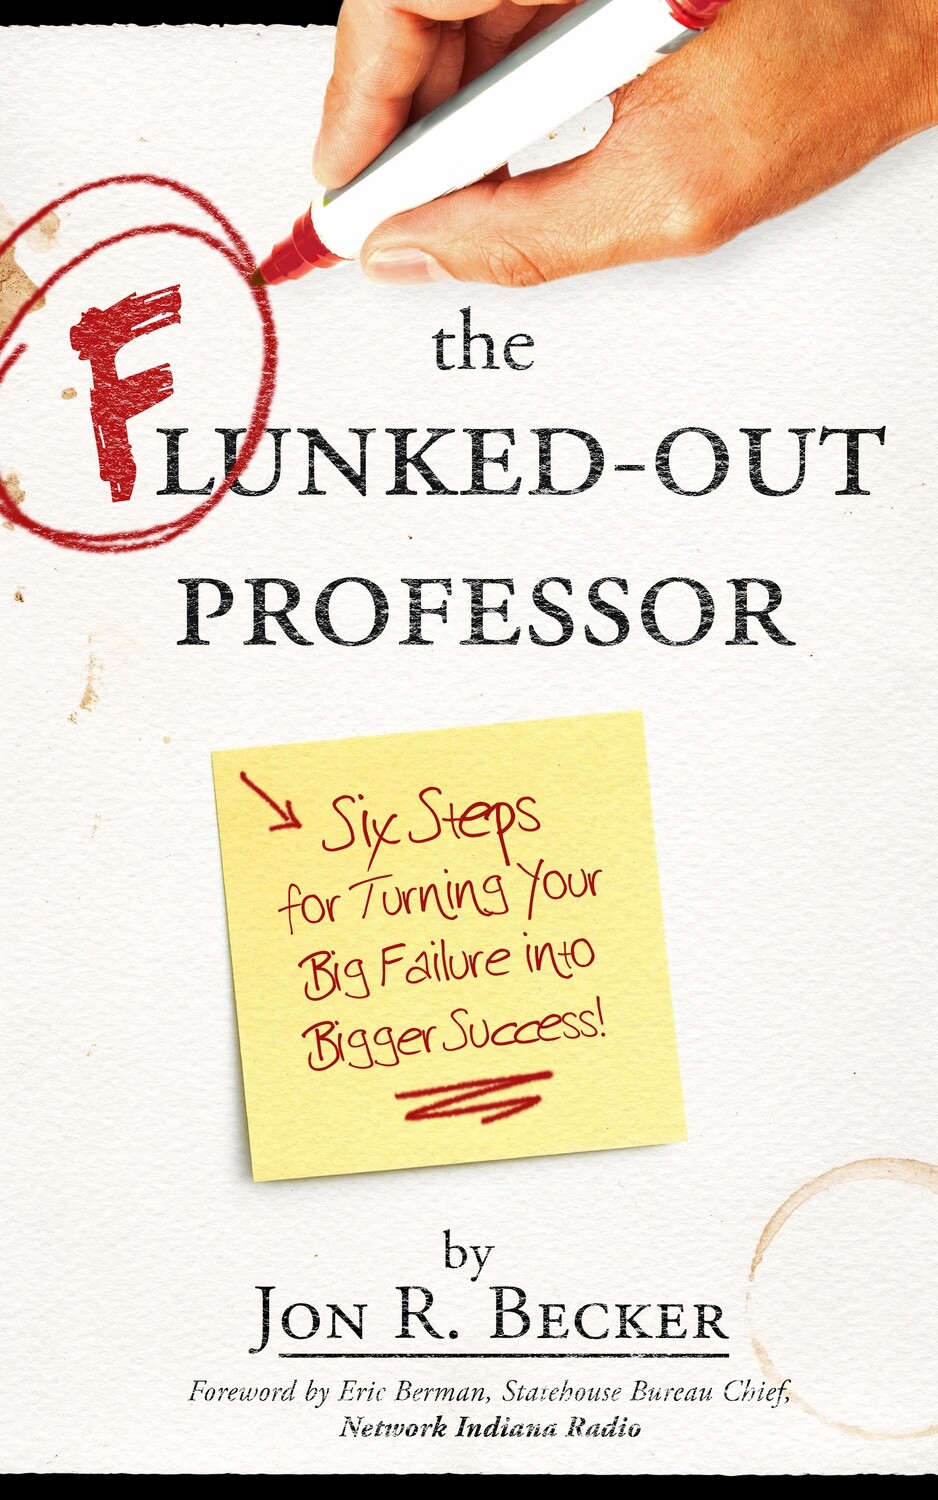 The Flunked-Out Professor: Six Steps for Turning Your Big Failure into Bigger Success